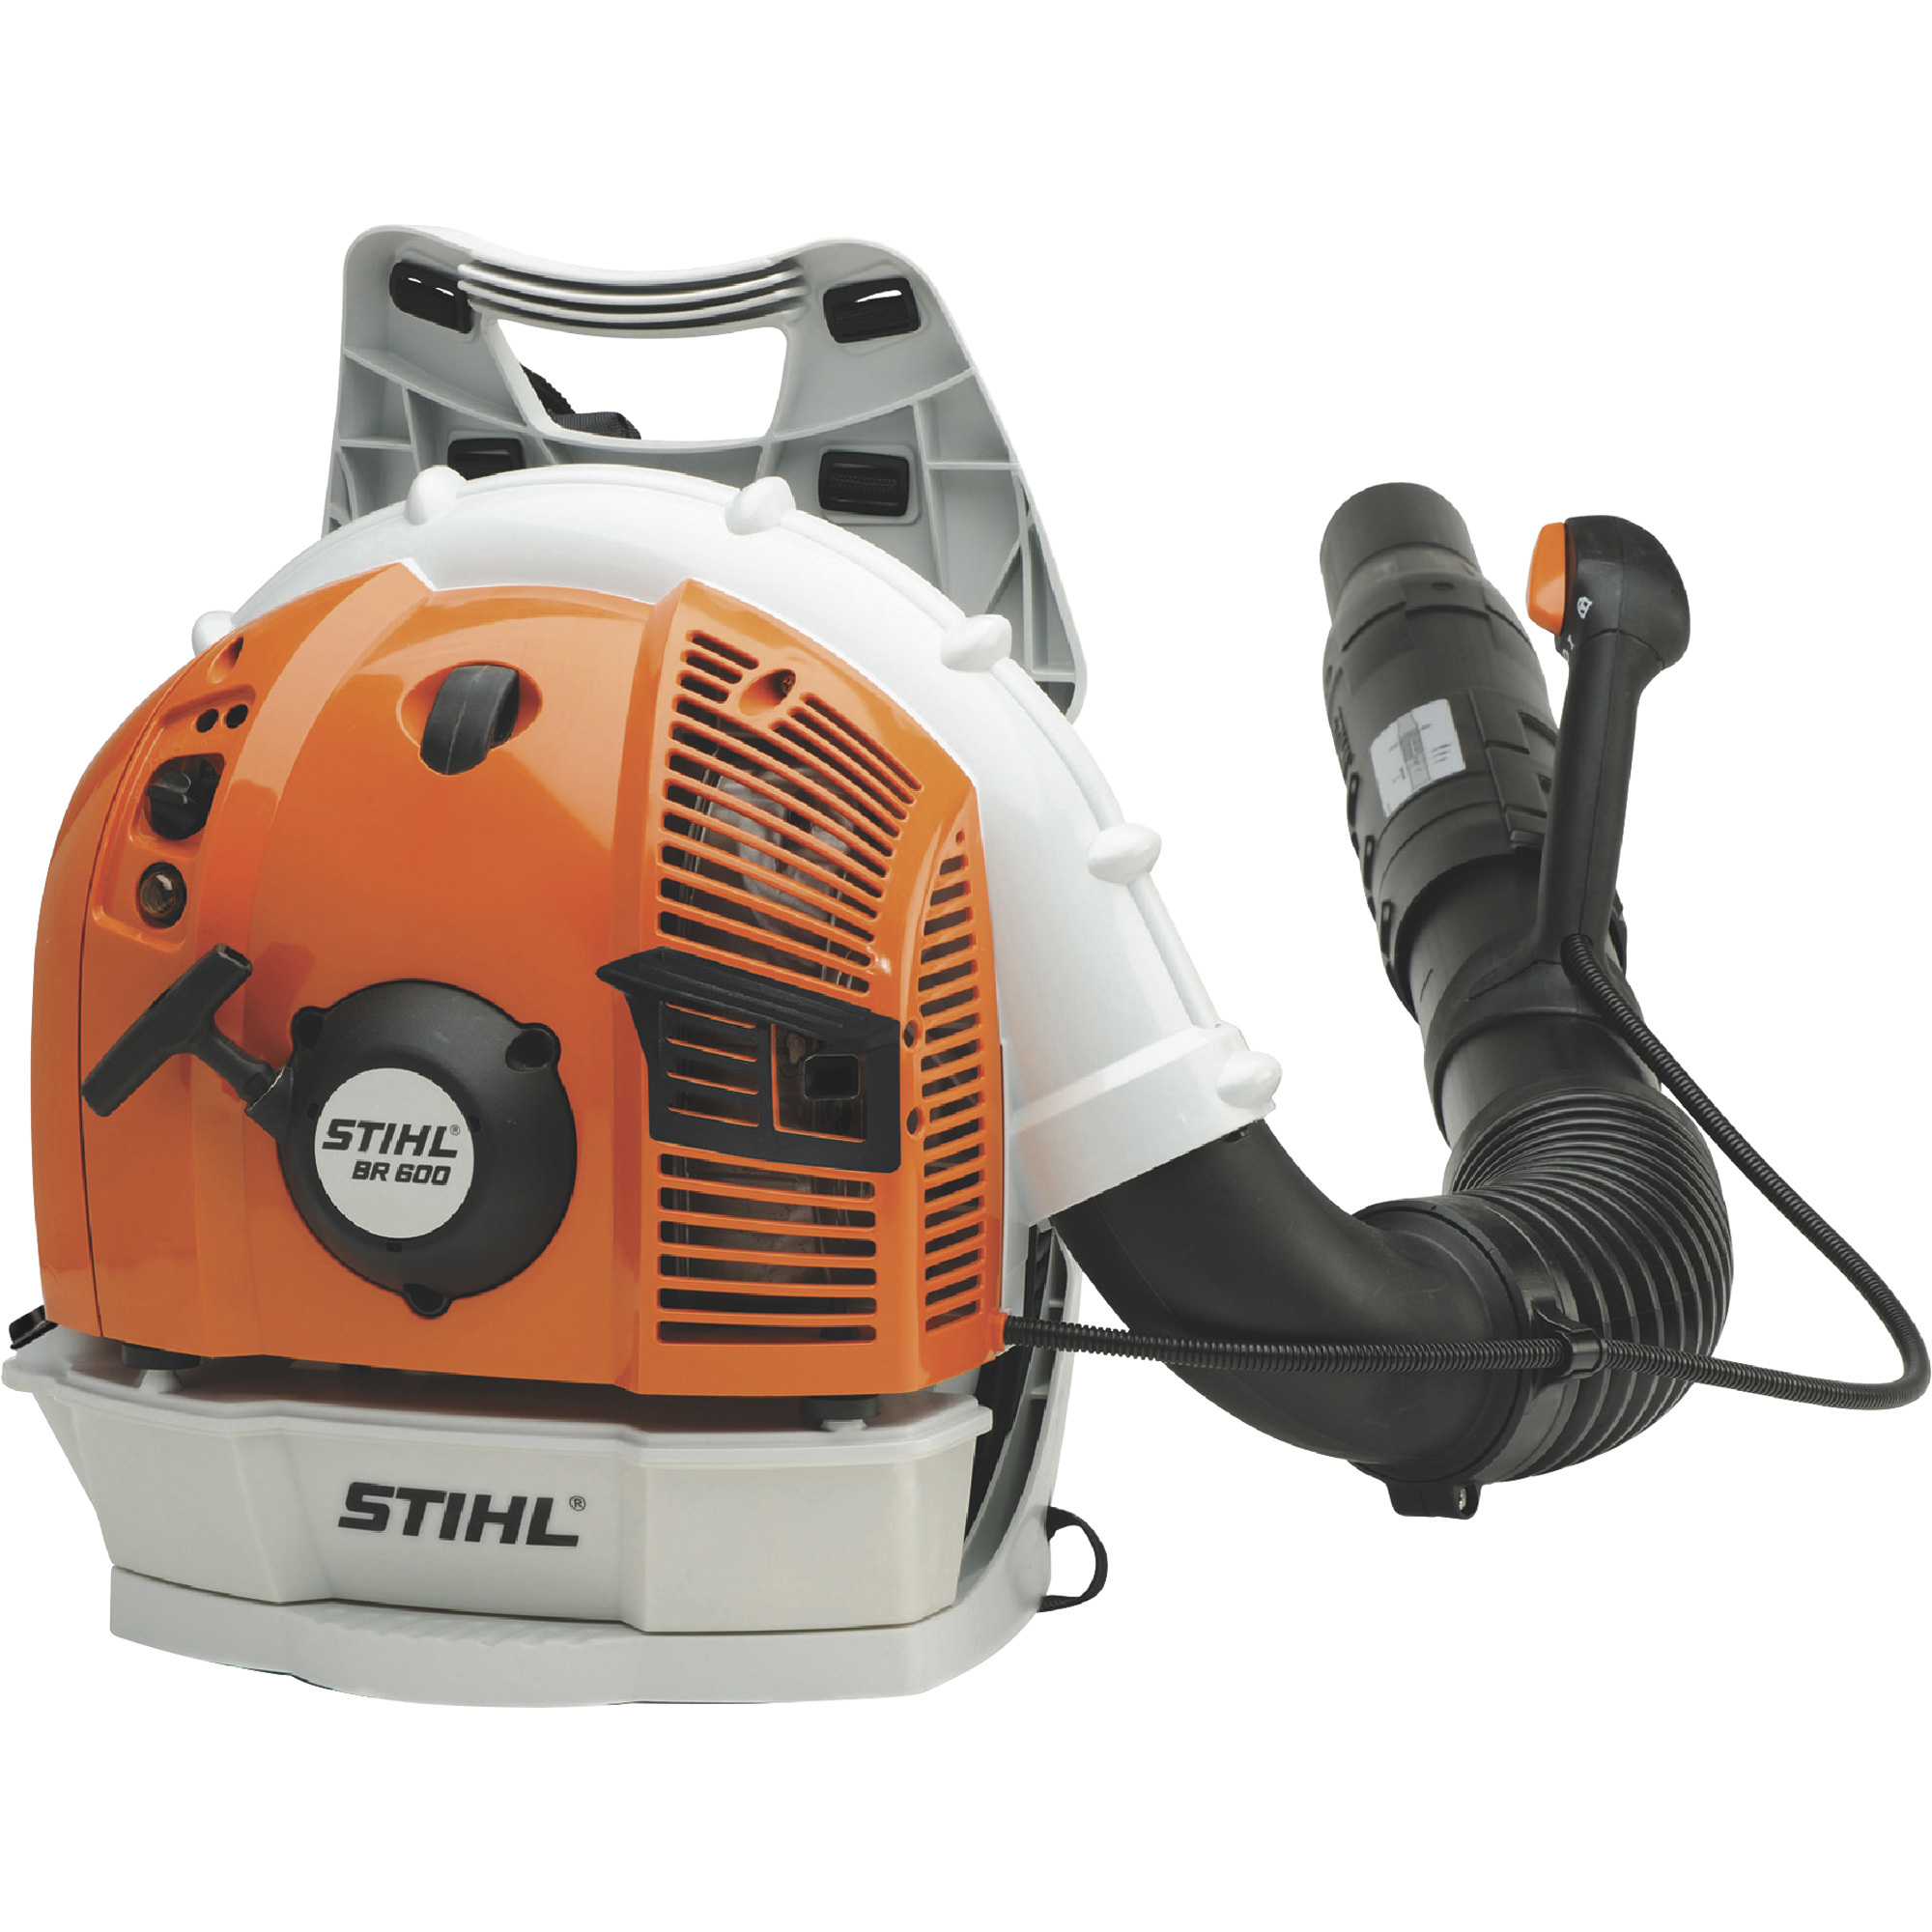 Stihl Professional Gas-Powered Backpack Blower â 64.8cc, 199 MPH, 677 CFM, Model BR 600